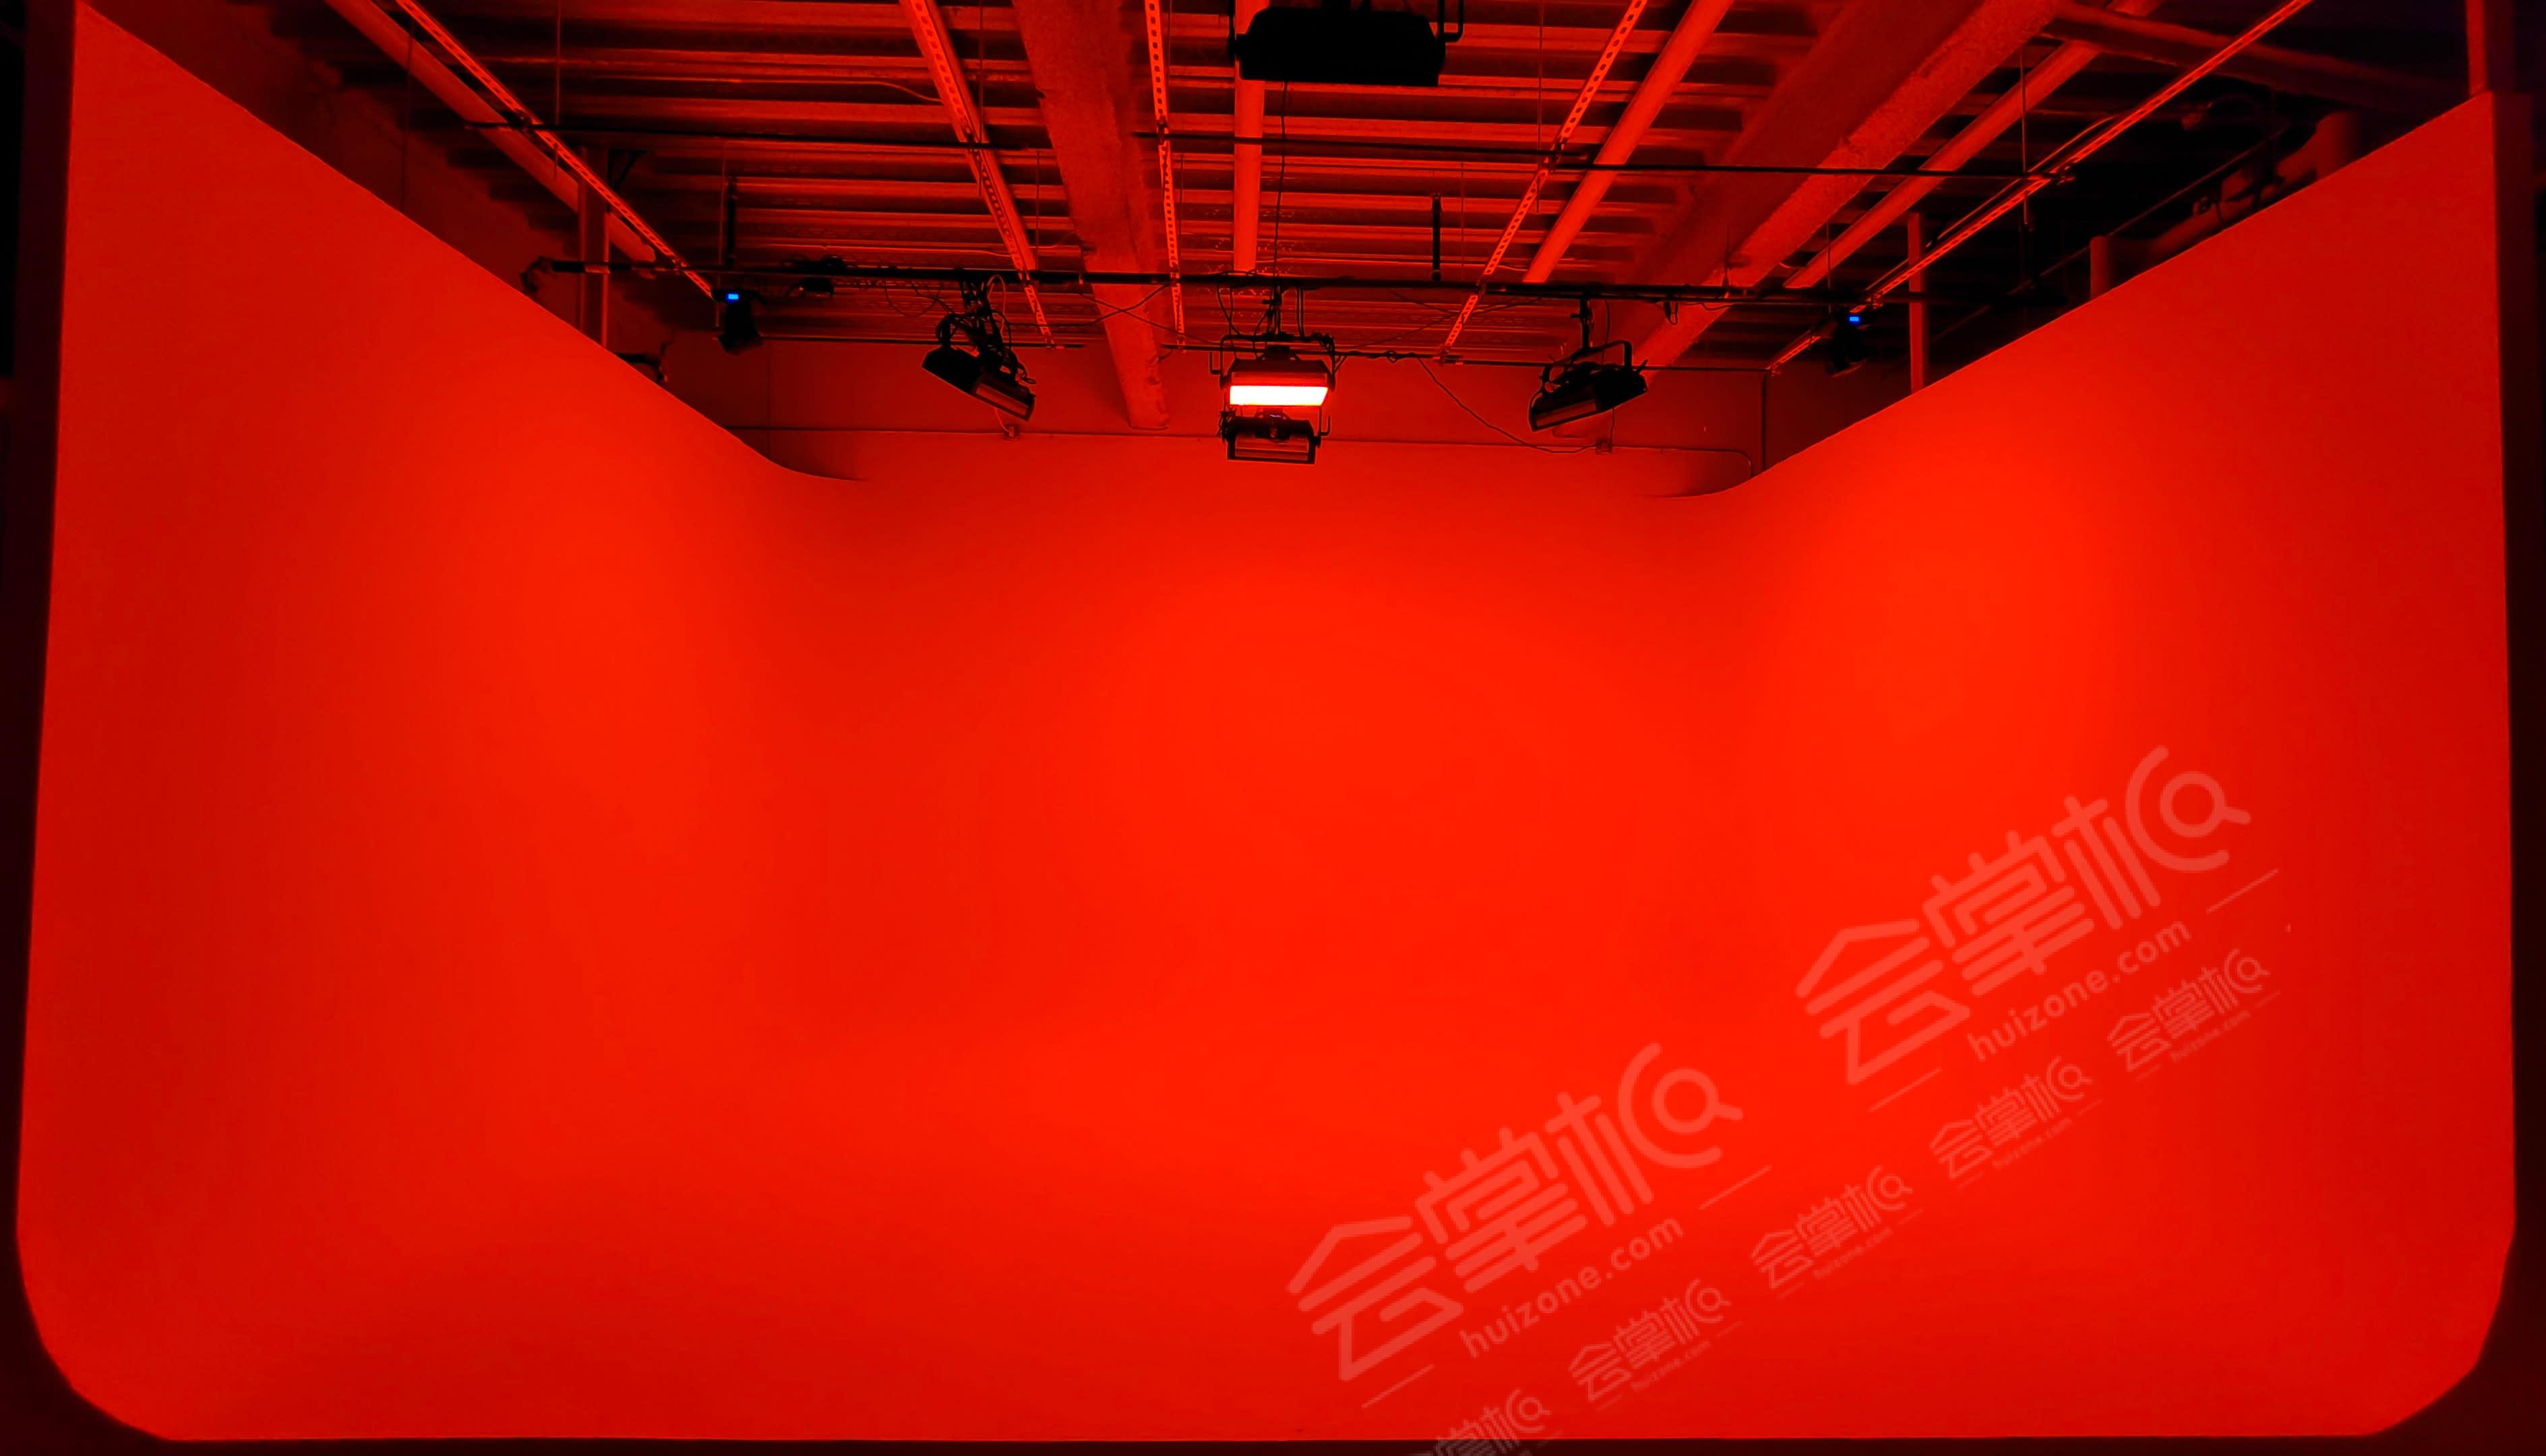 EVENTS SPACE RENTAL FROM 250$ TO 400$ Great Space for Events, Fashion Show, Video & Photo shoots